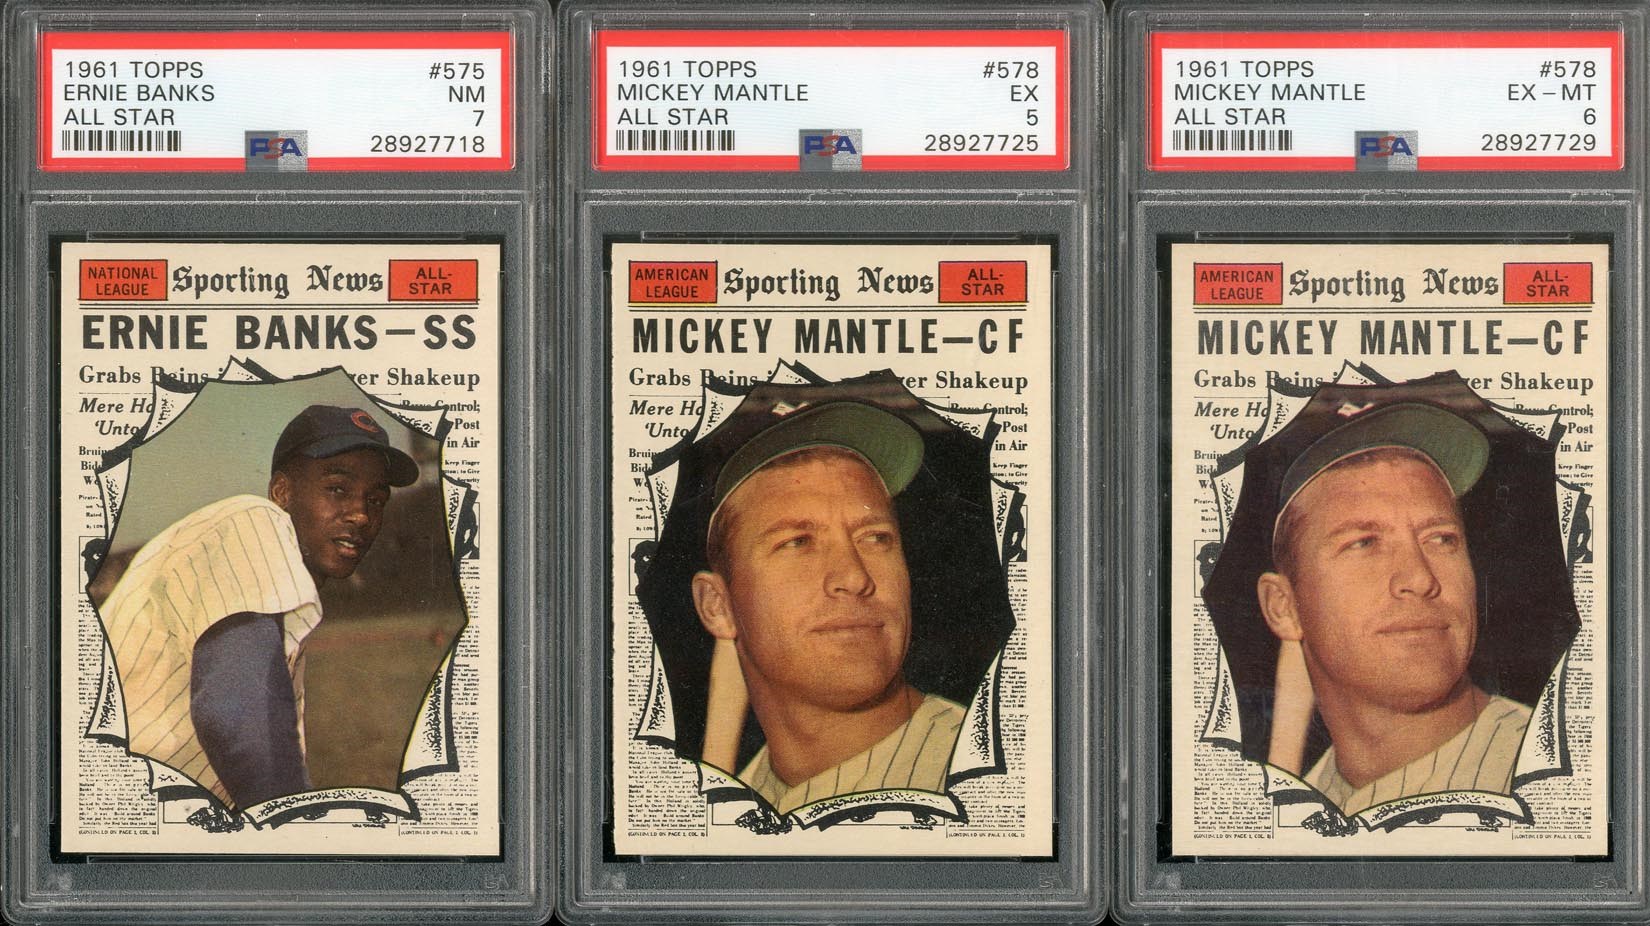 Baseball and Trading Cards - 1961 Topps PSA Graded Collection (21), with TWO Mantle A/S Cards